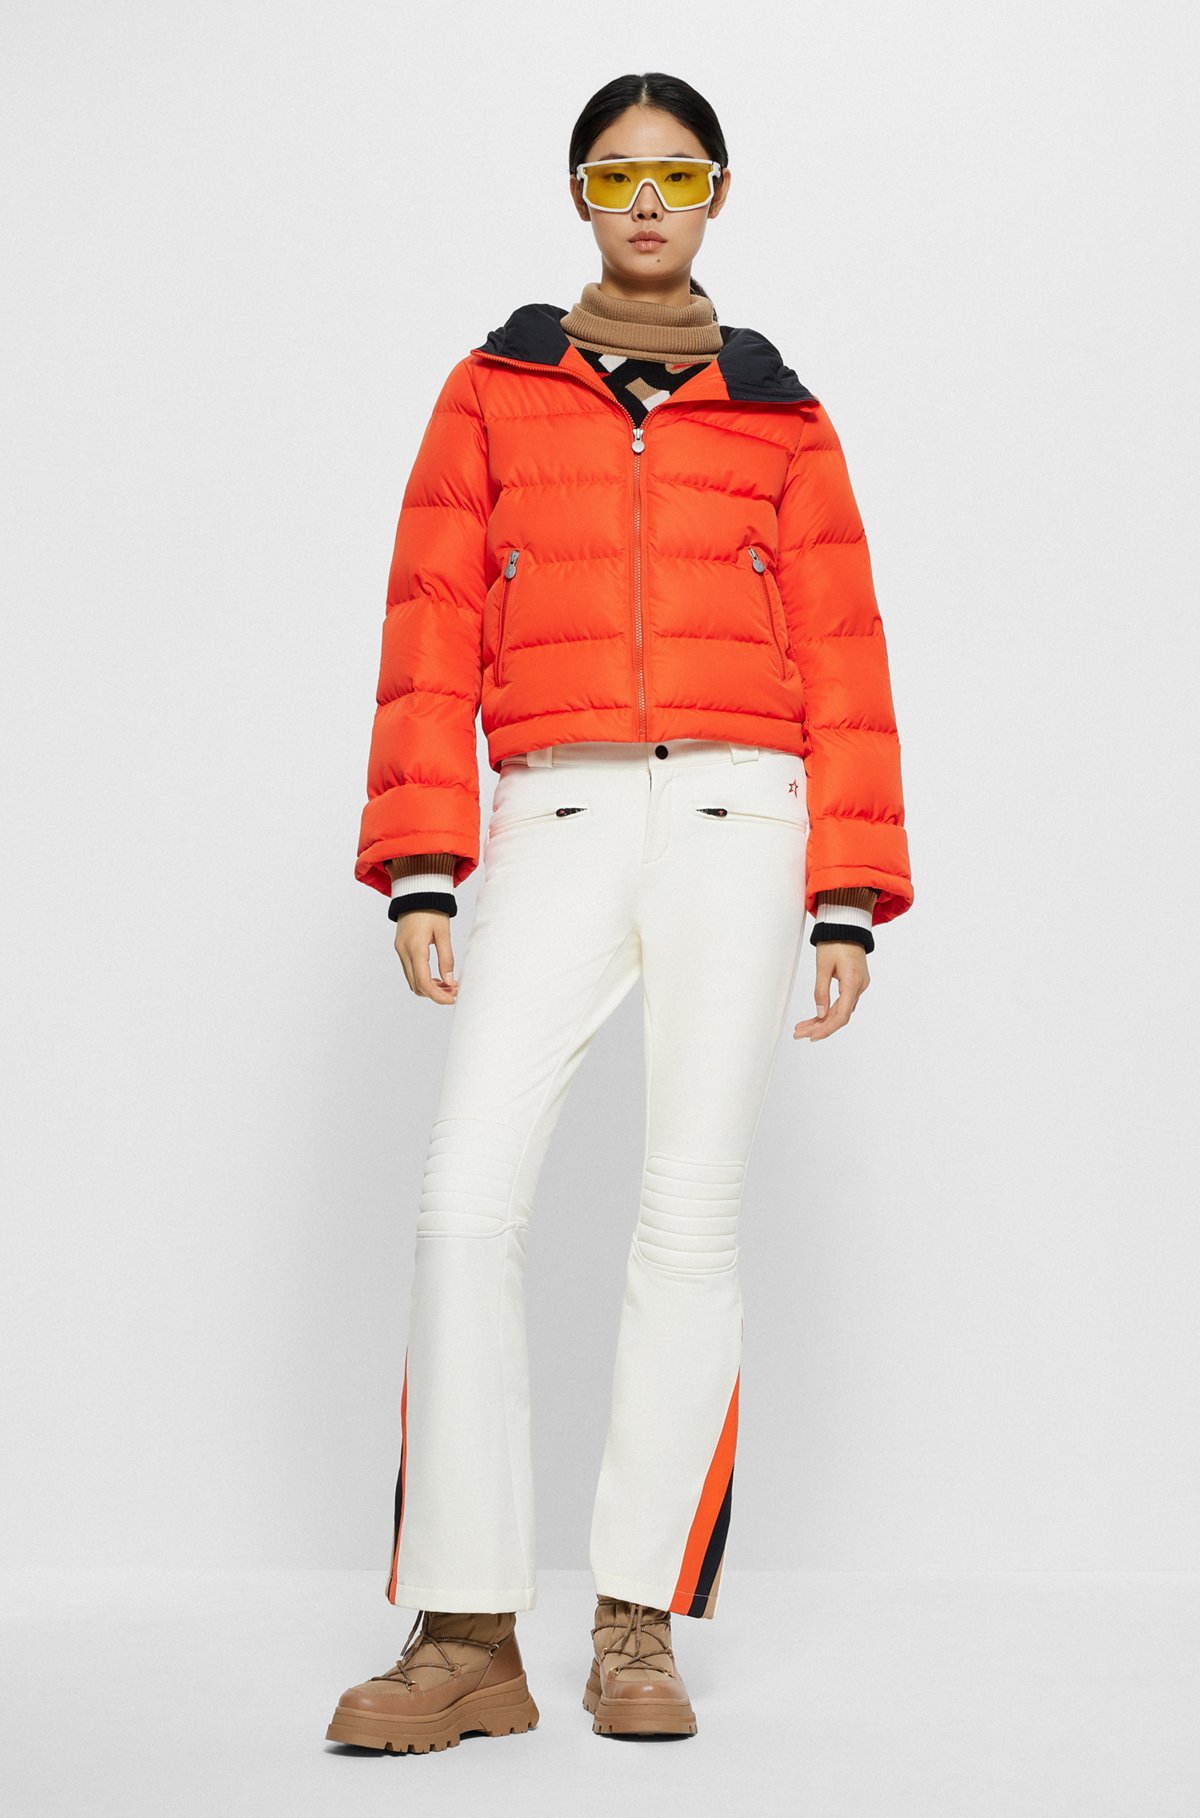 BOSS x Perfect Moment hooded jacket with capsule detailing, Orange